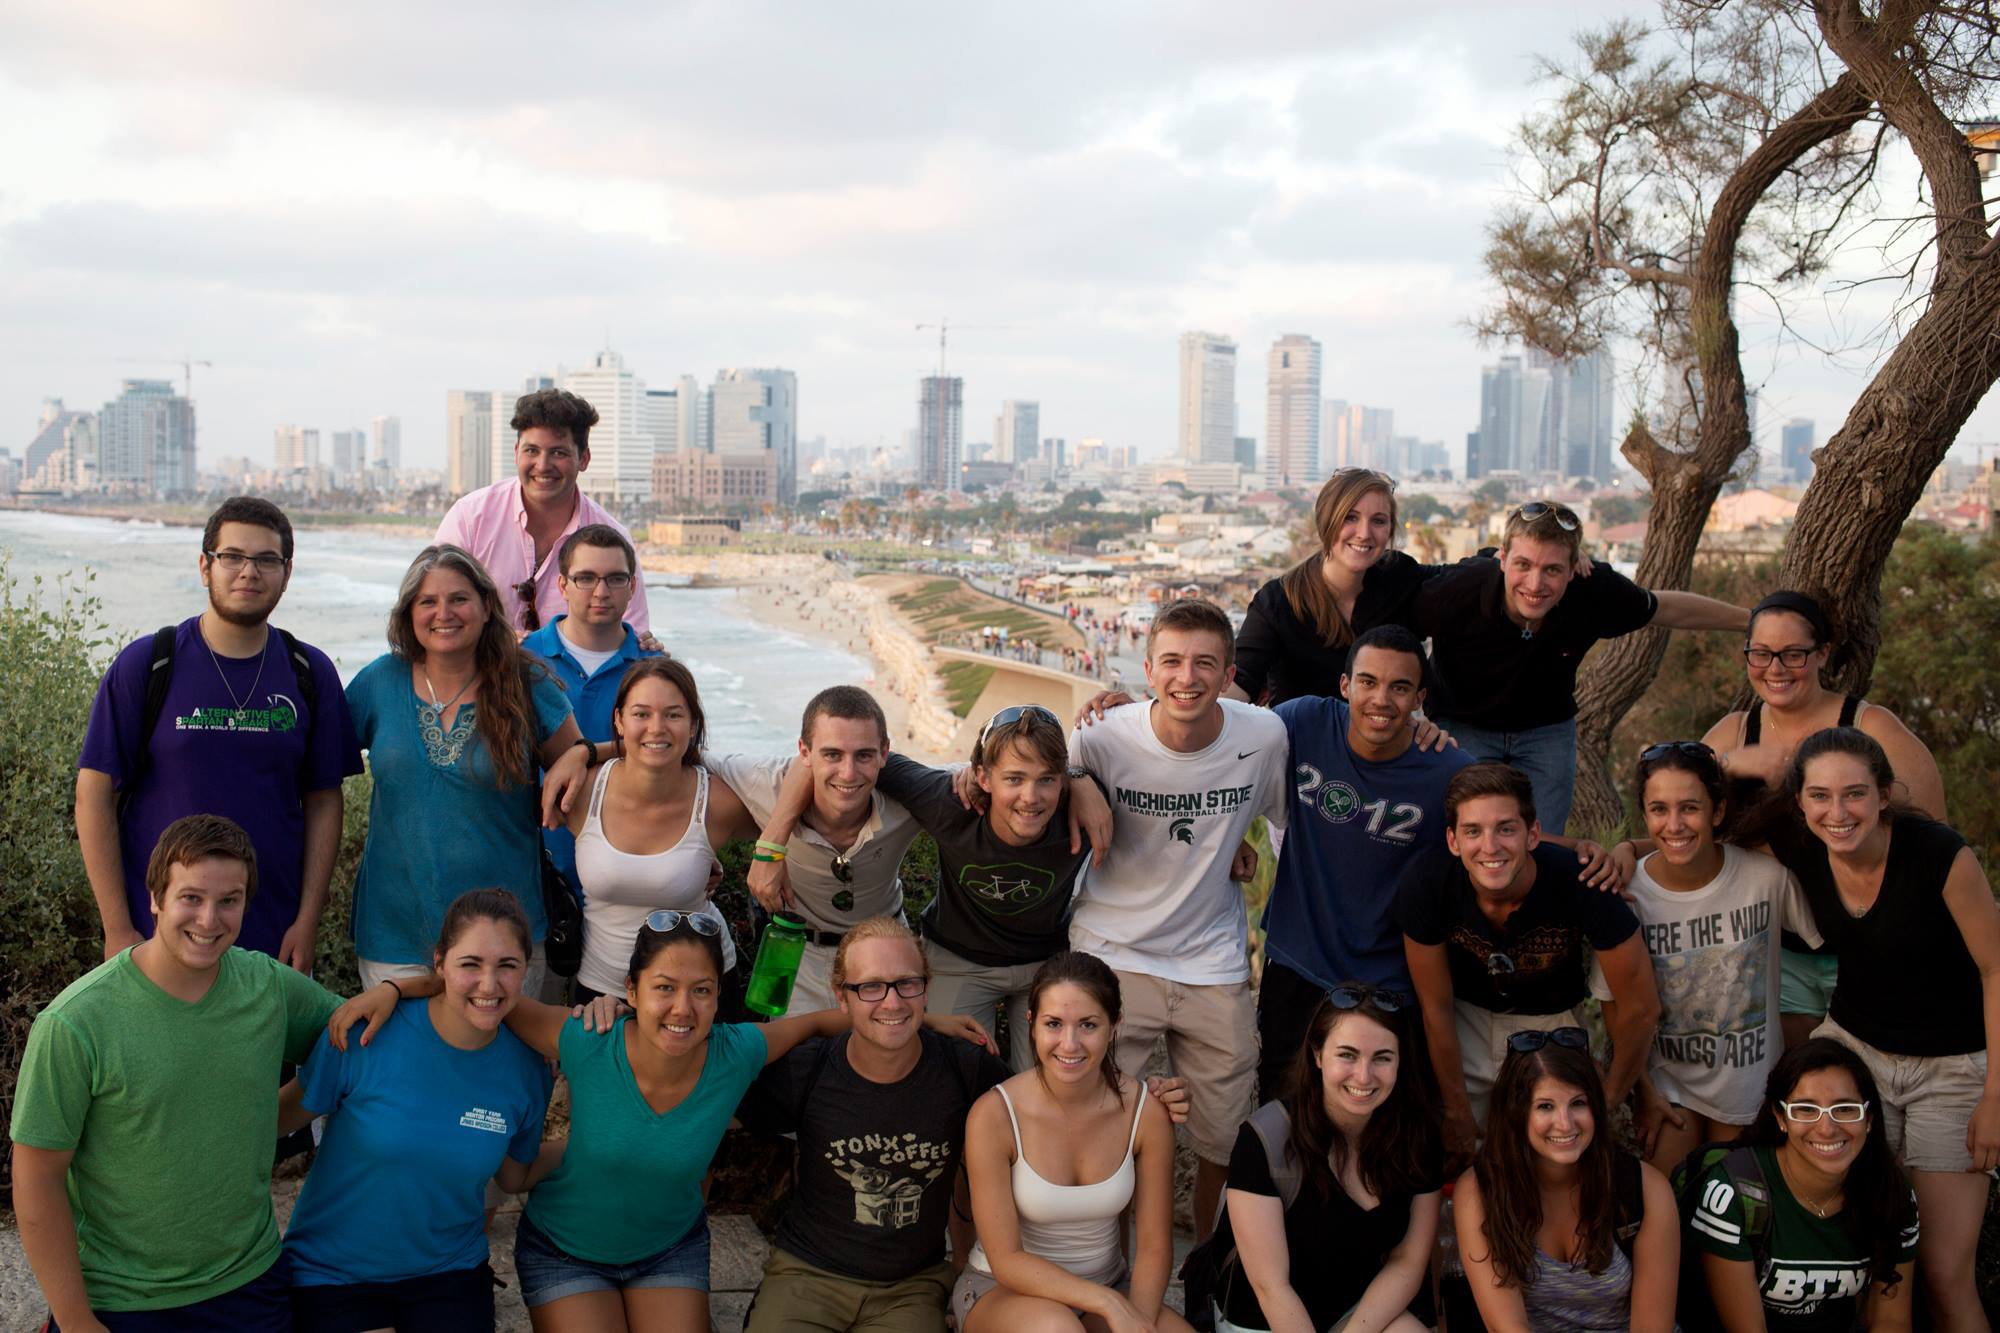 A diverse group of college students stand for a photo opportunity in Israel, the desert behind them.